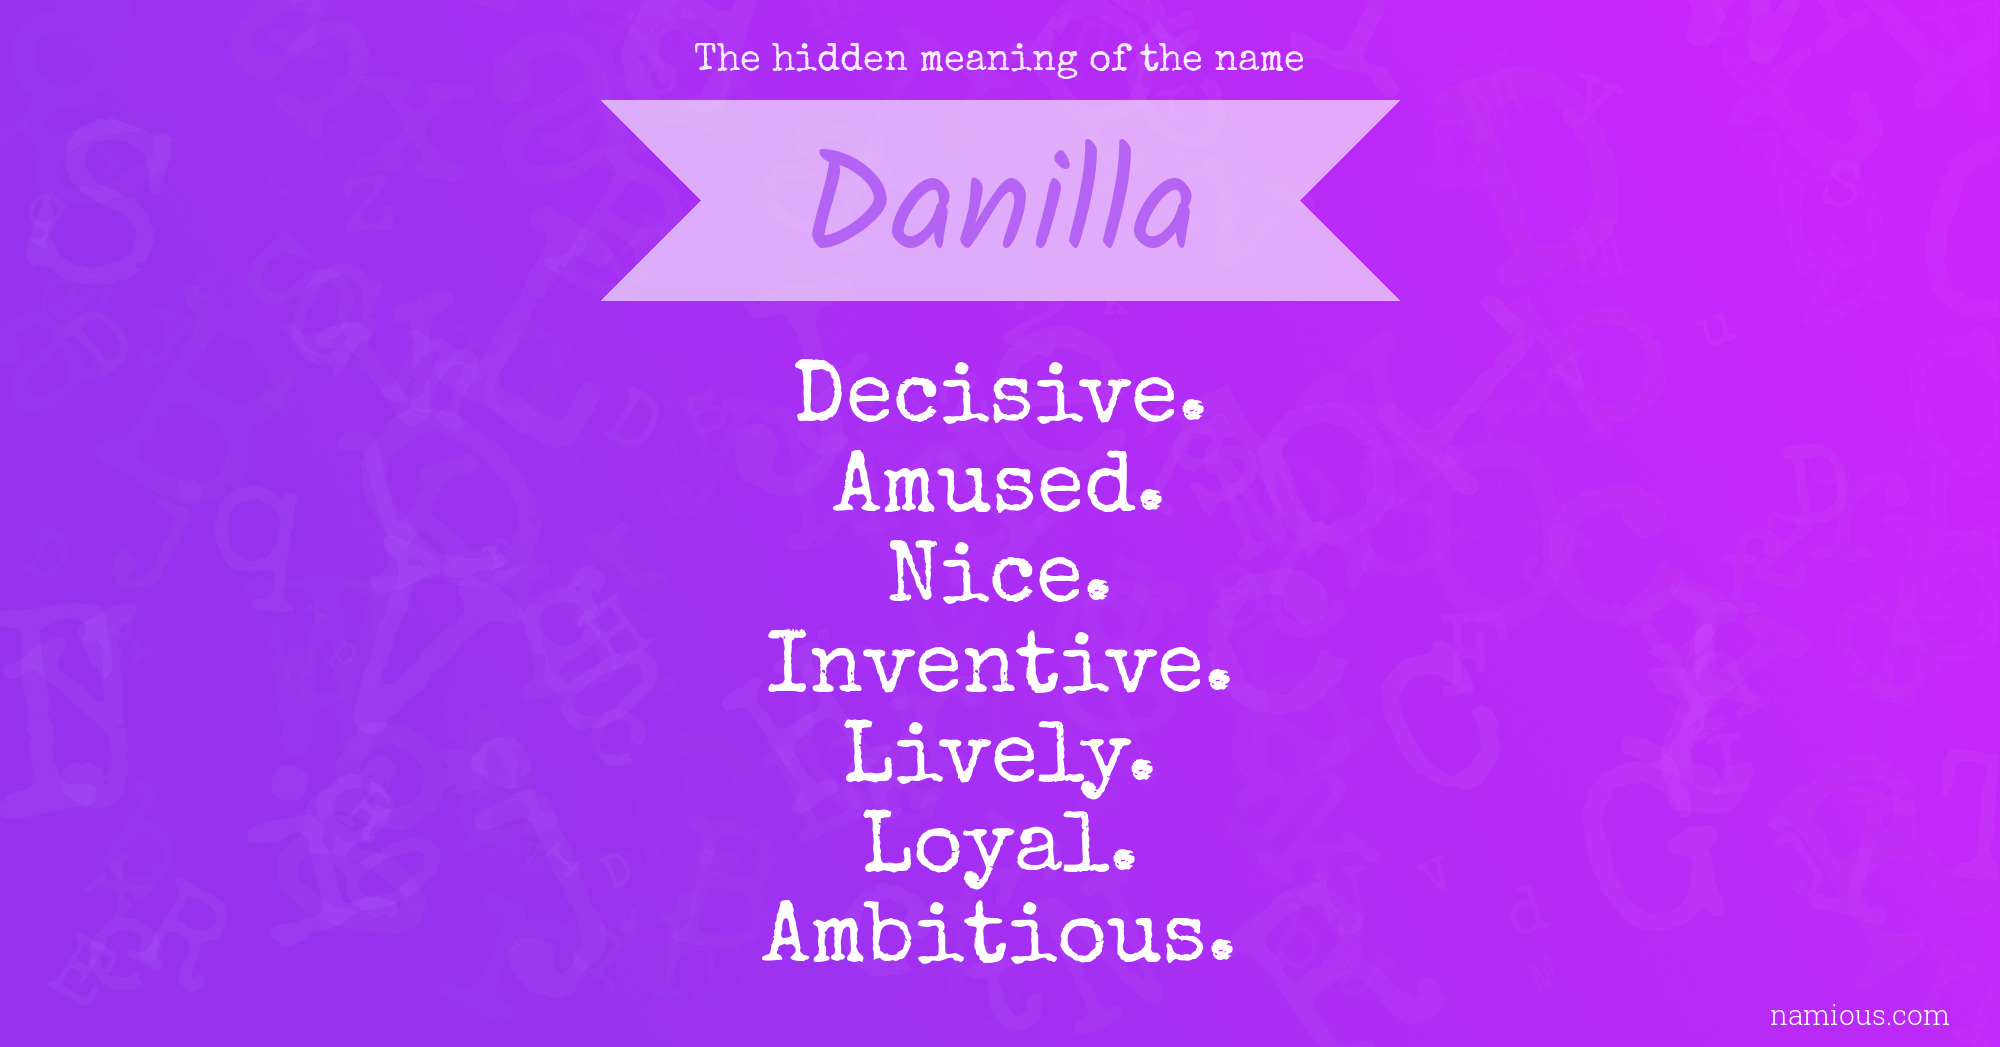 The hidden meaning of the name Danilla